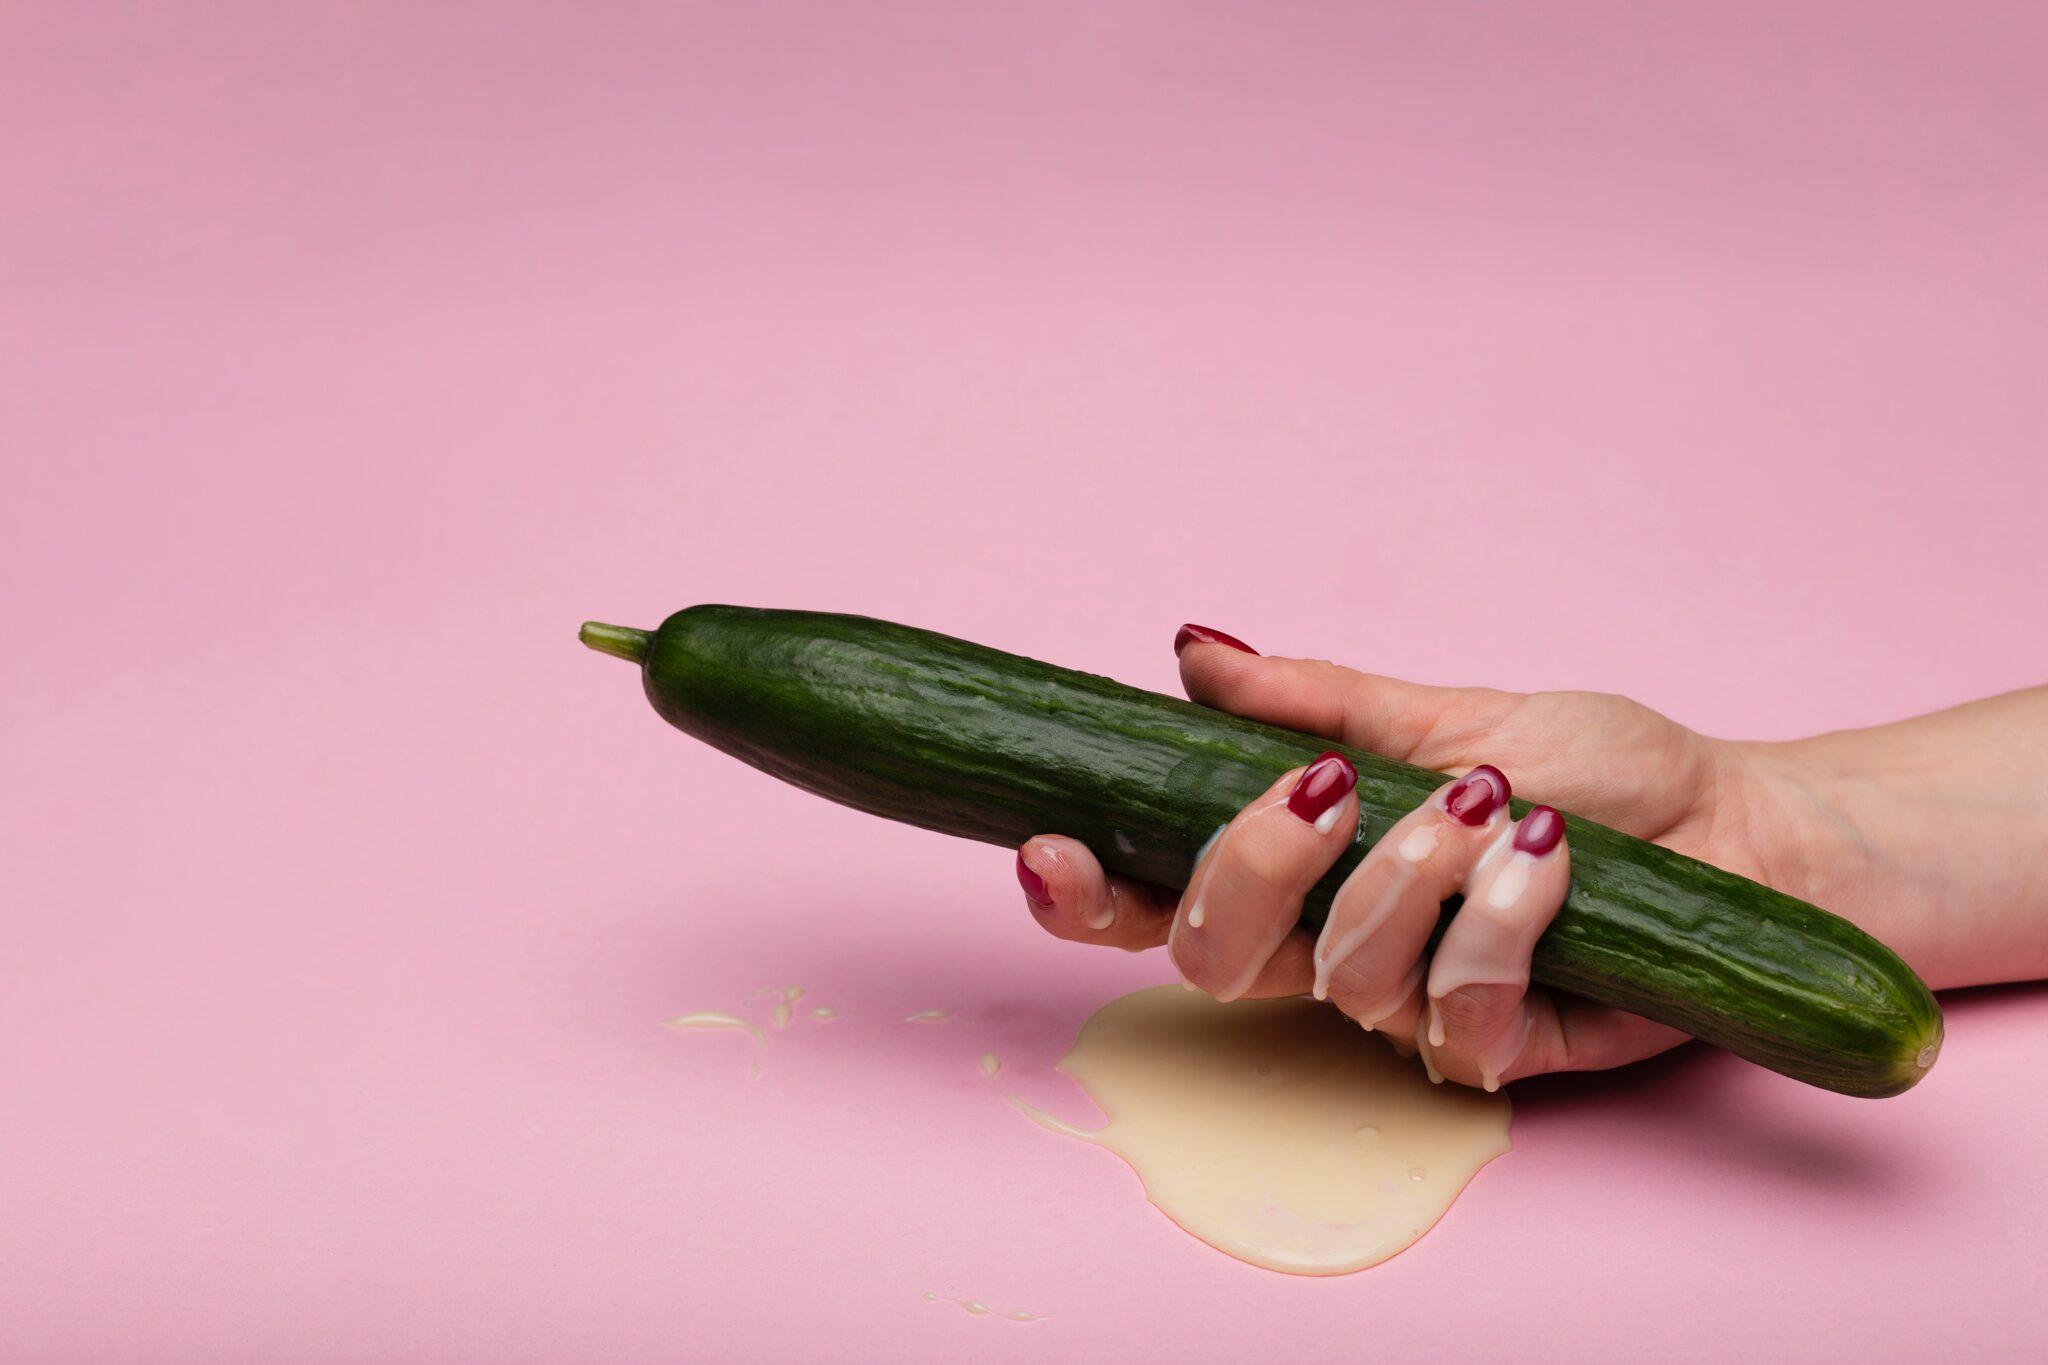 A woman's hand holding a large cucumber and covered in a white liquid.